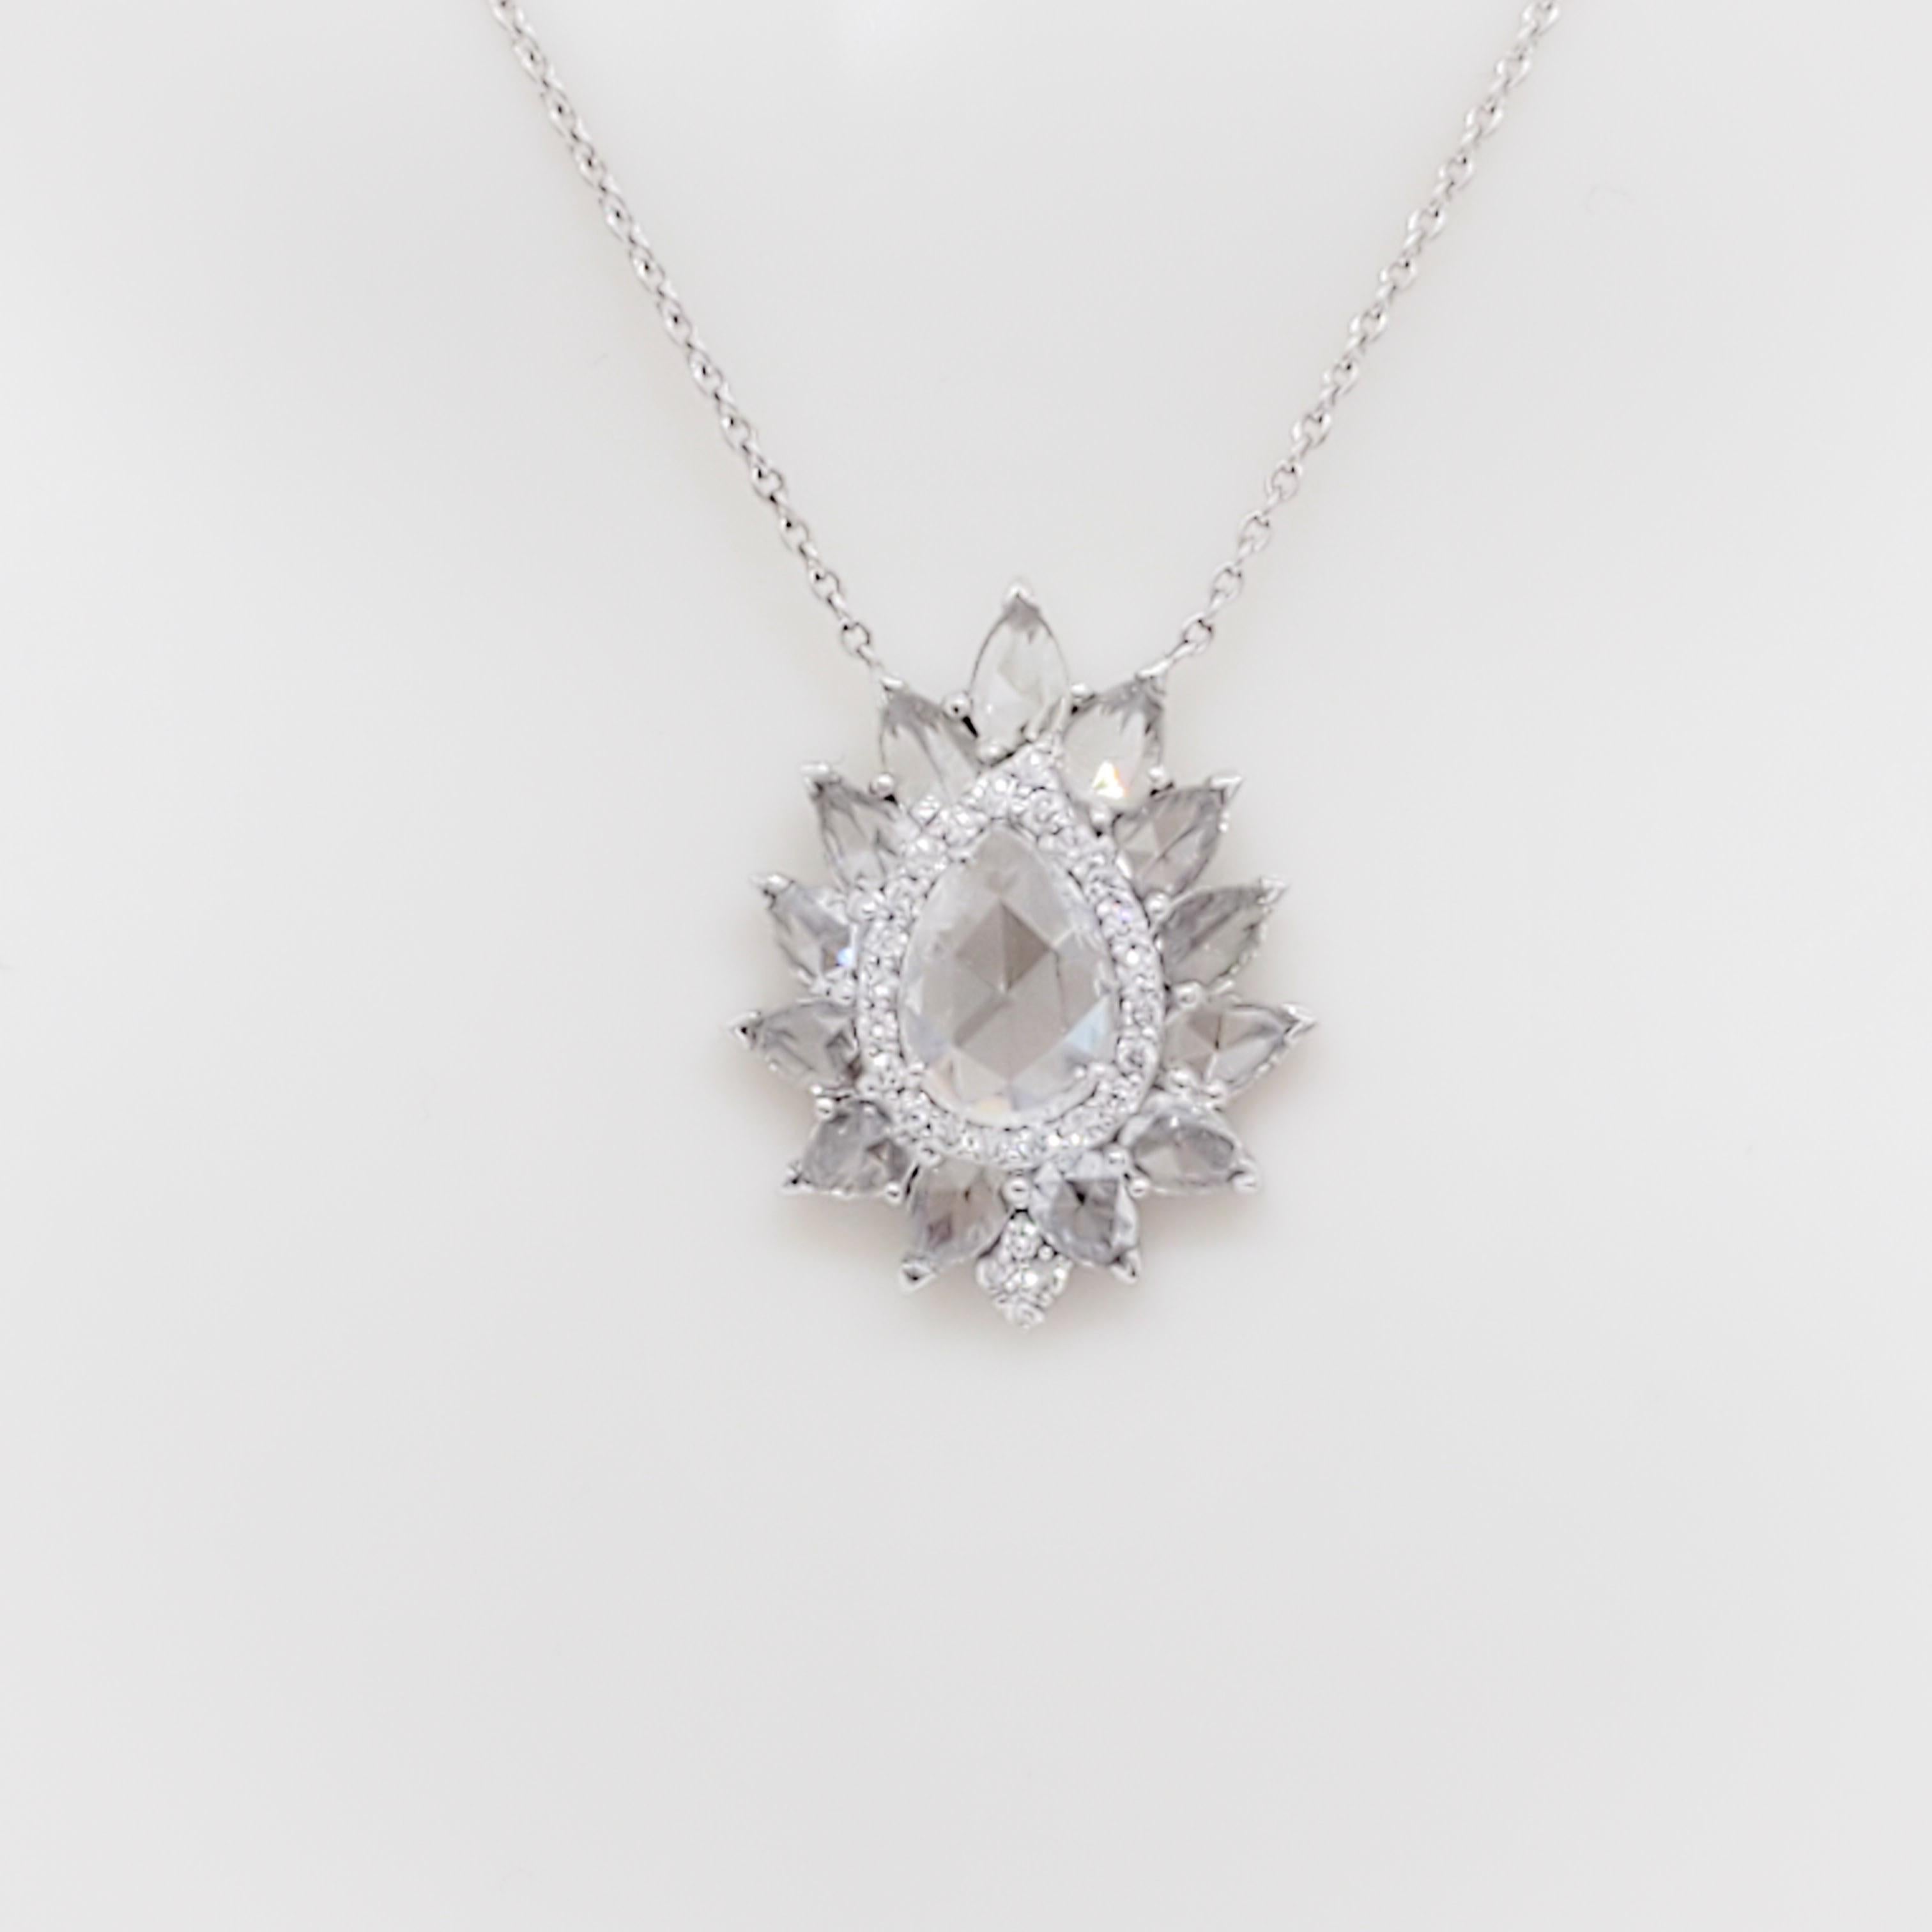 Gorgeous 0.65 ct. rose cut pear shape with 0.80 ct. rose cut pear shapes white diamond rounds handmade in 18k white gold.  This pendant is chic and feminine.  